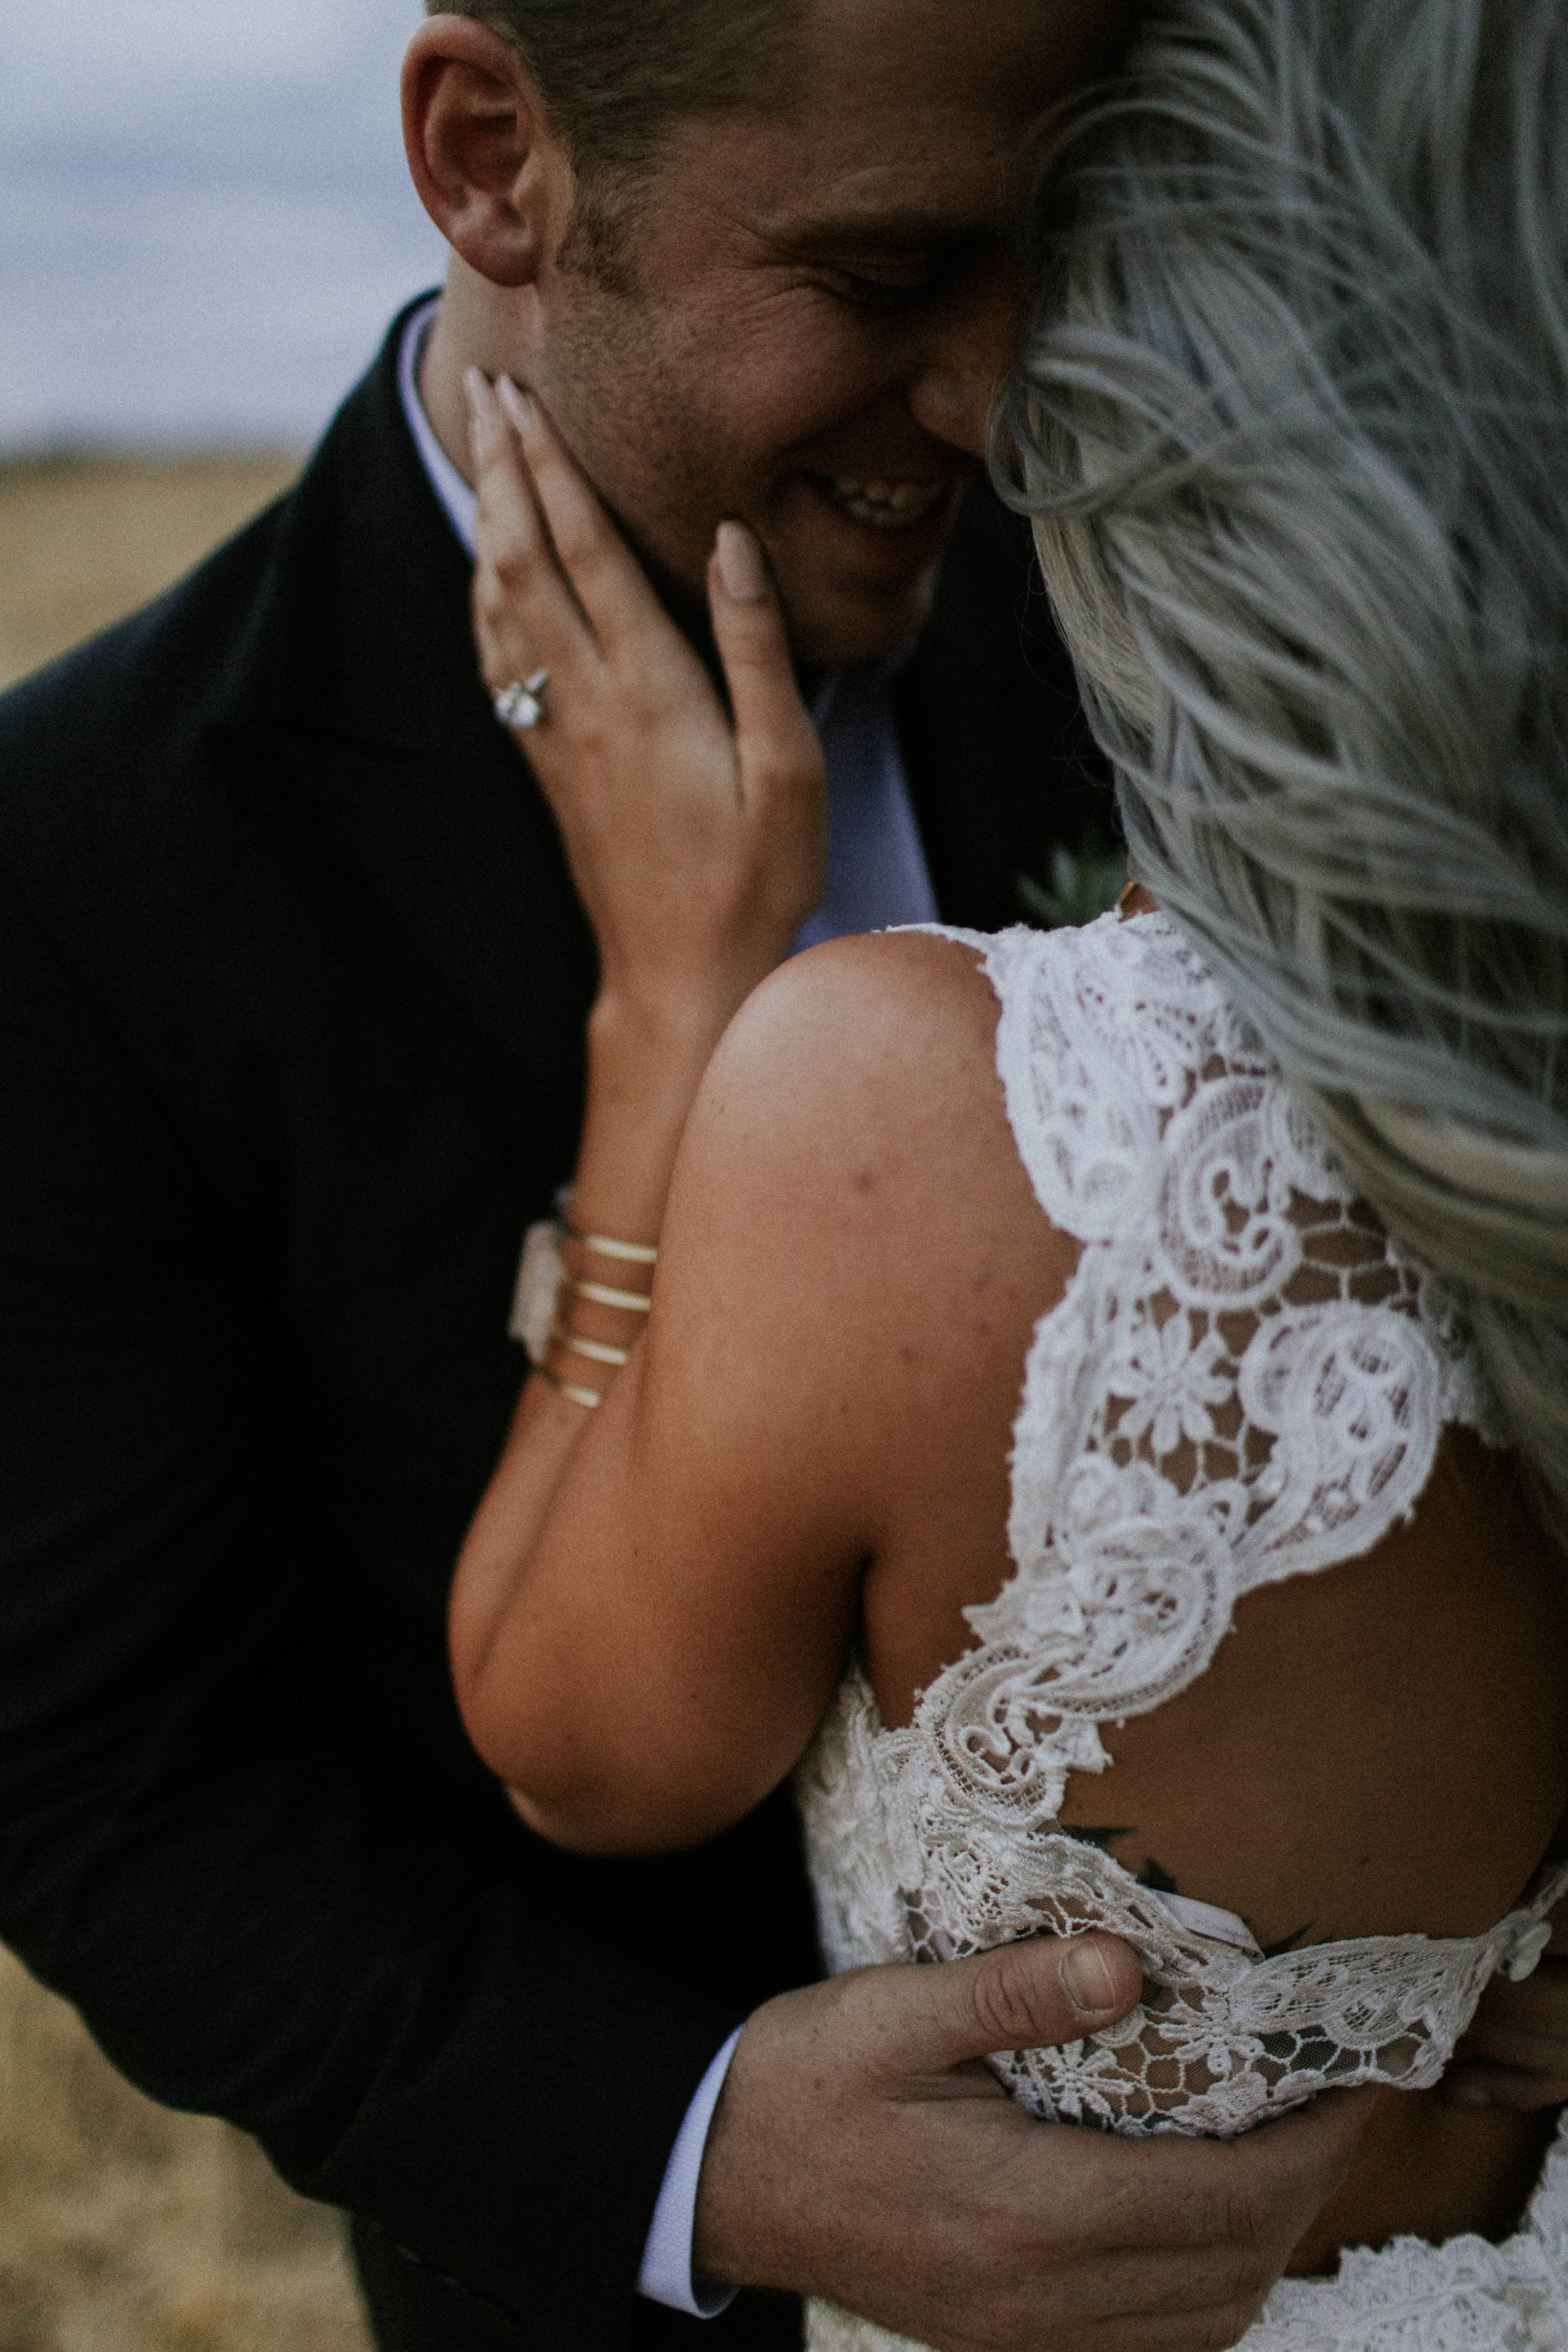 Romantic Lace Wedding Dress in Boho-Chic Styled Shoot